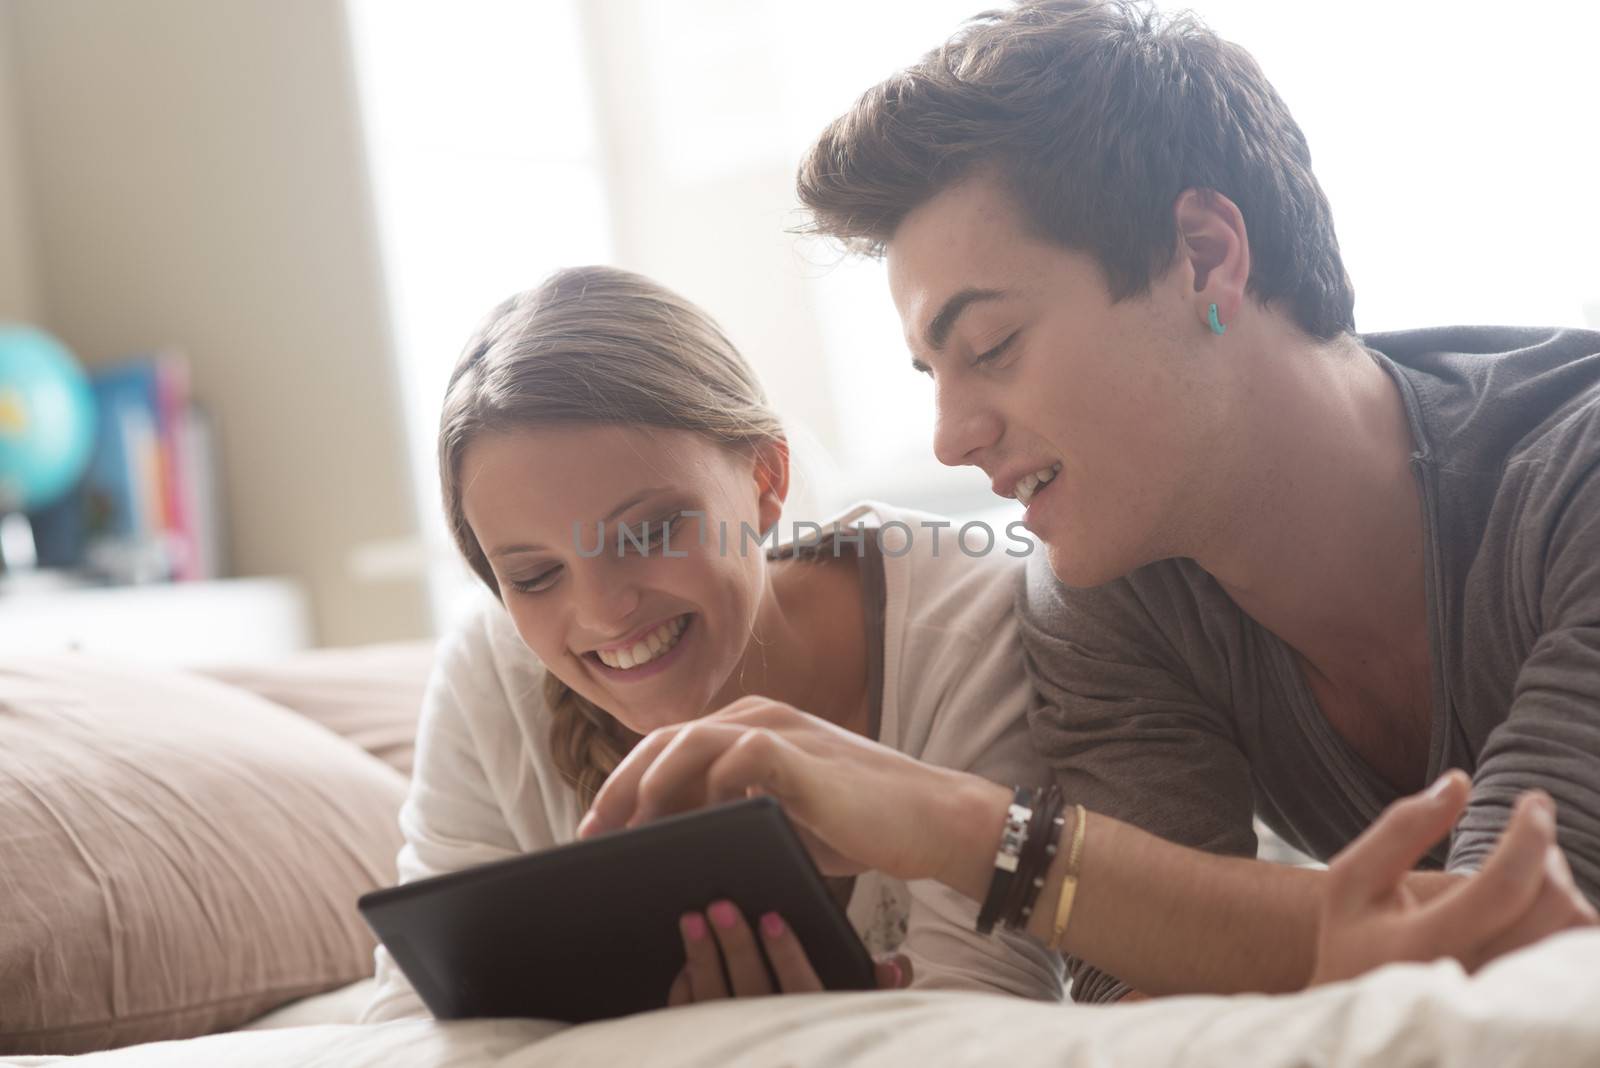 Two happy friends lying in bed using a digital tablet together 